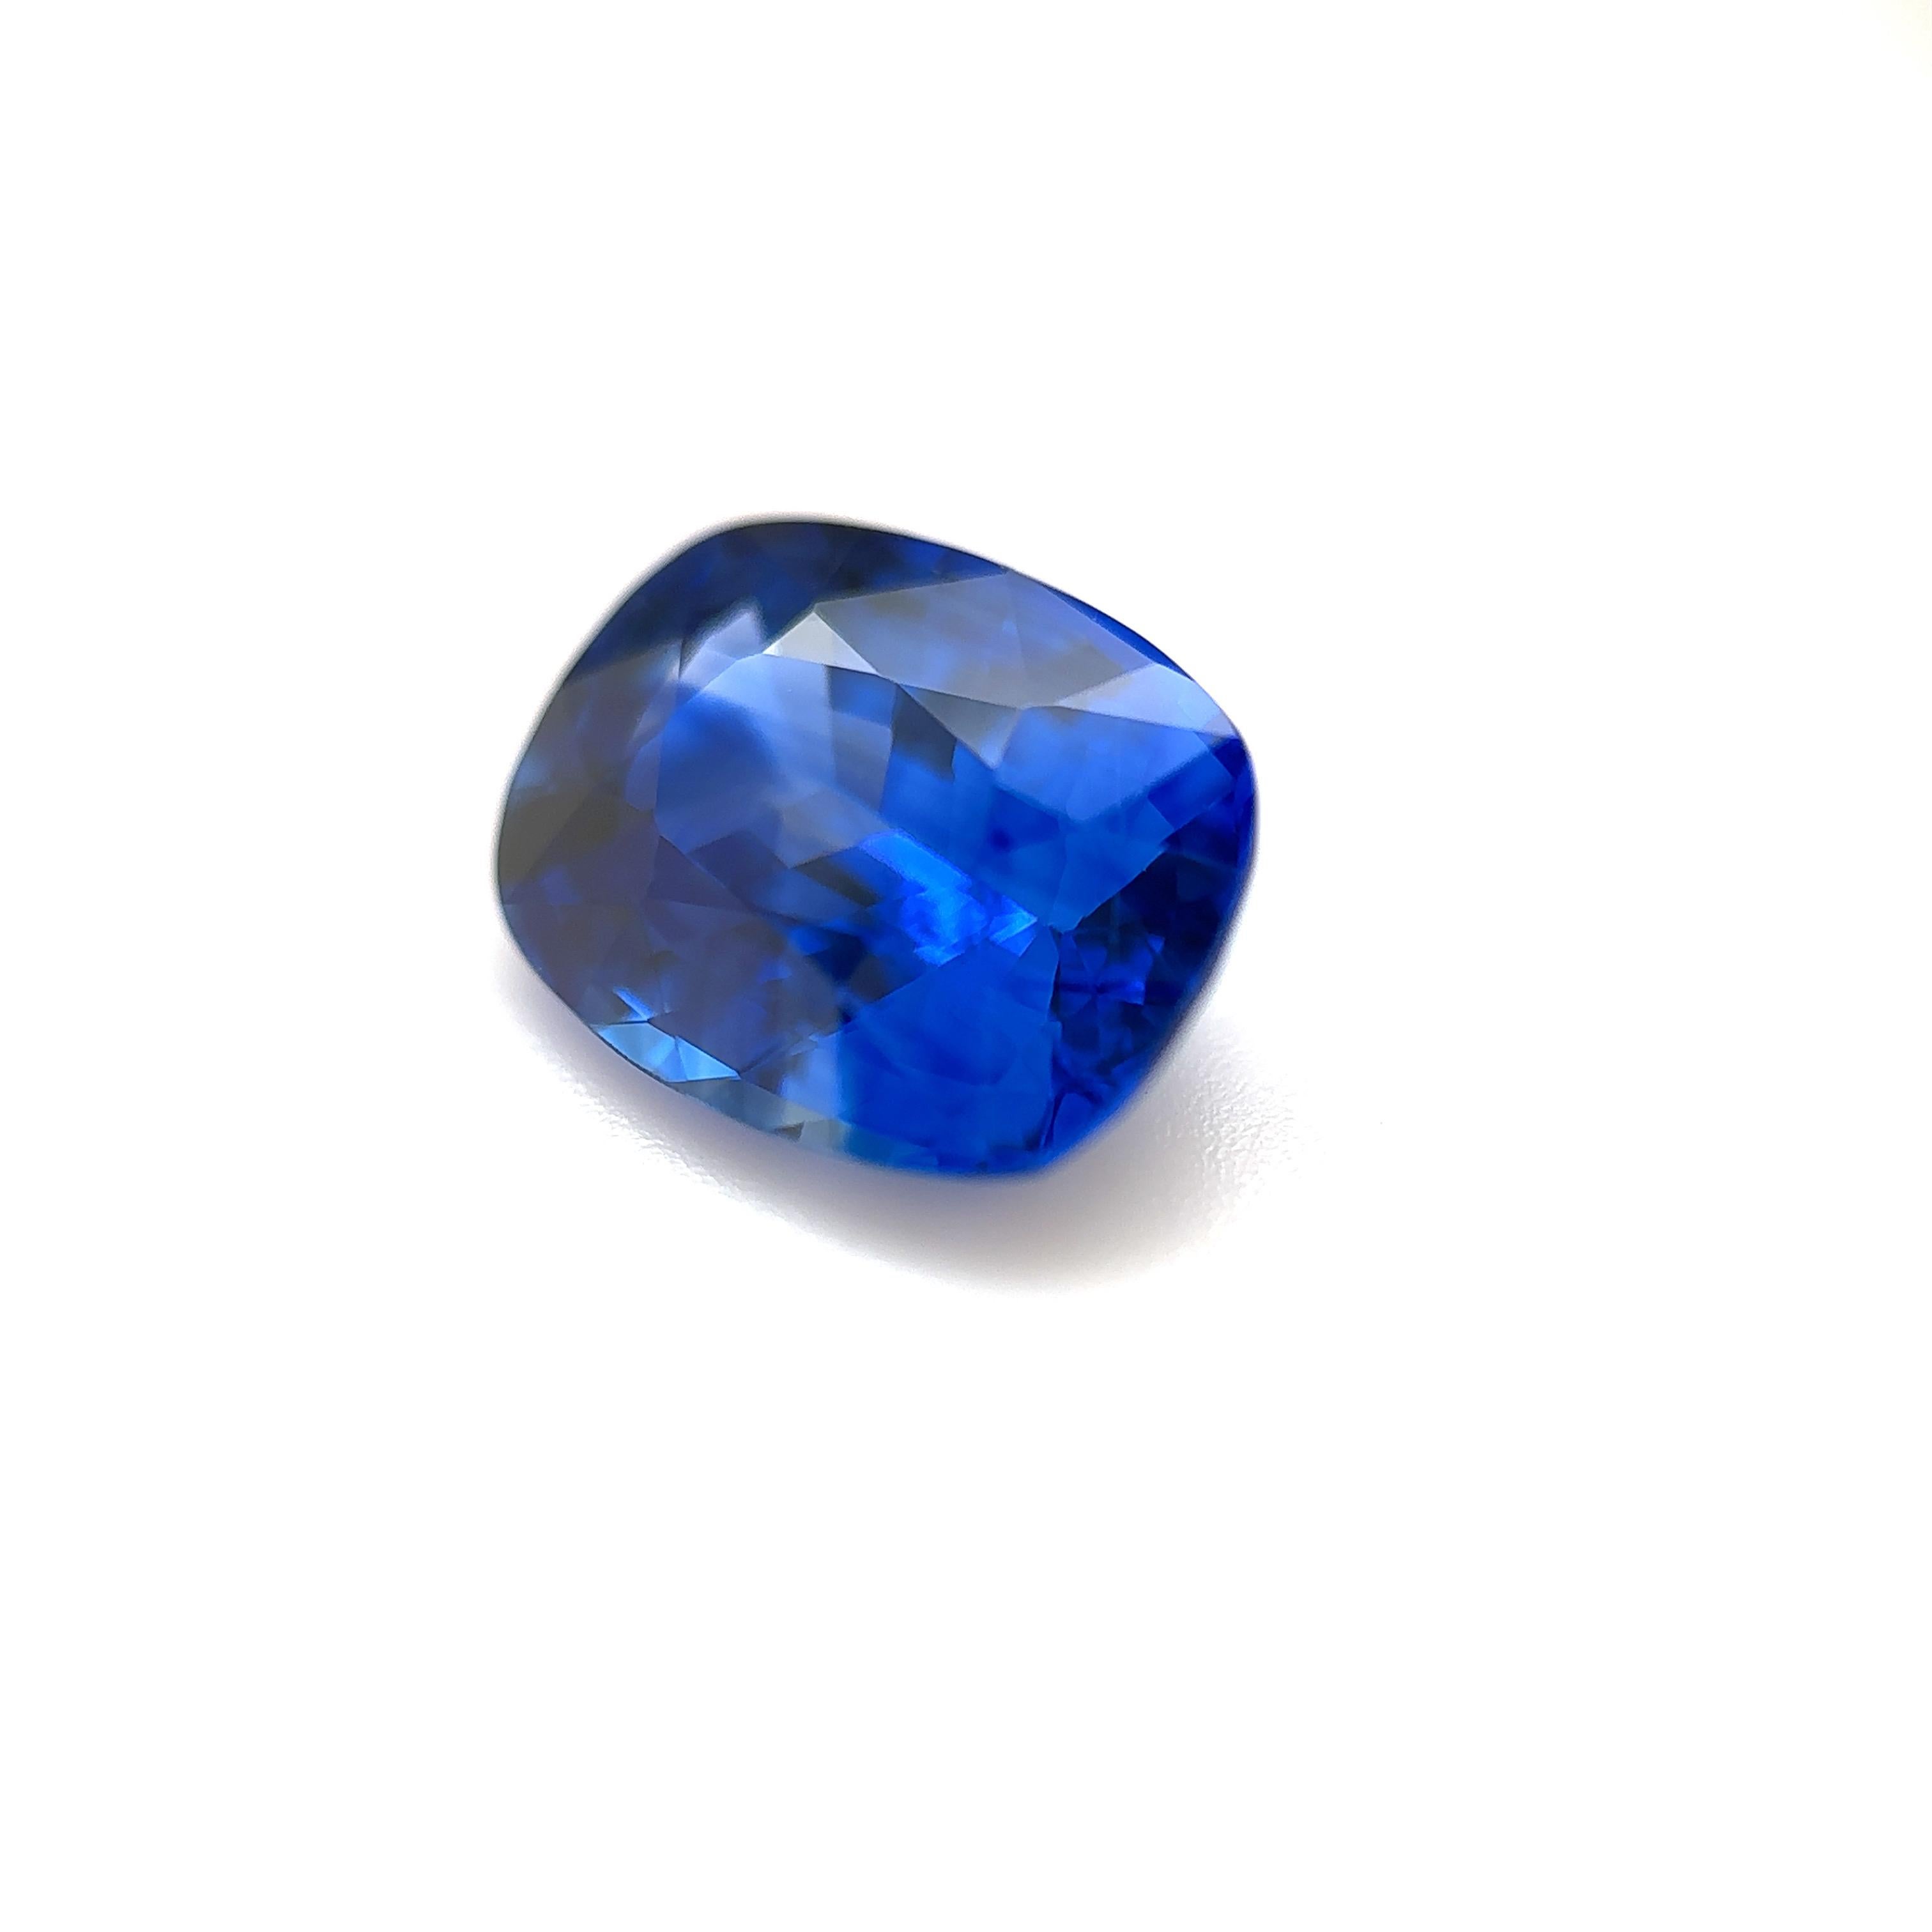 3.06 Carat heated royal blue natural sapphire loose stone cushion (customization option available)

Elevate your jewellery collection to new heights of sophistication with our stunning 3.06-carat heated royal blue cushion sapphire. Meticulously